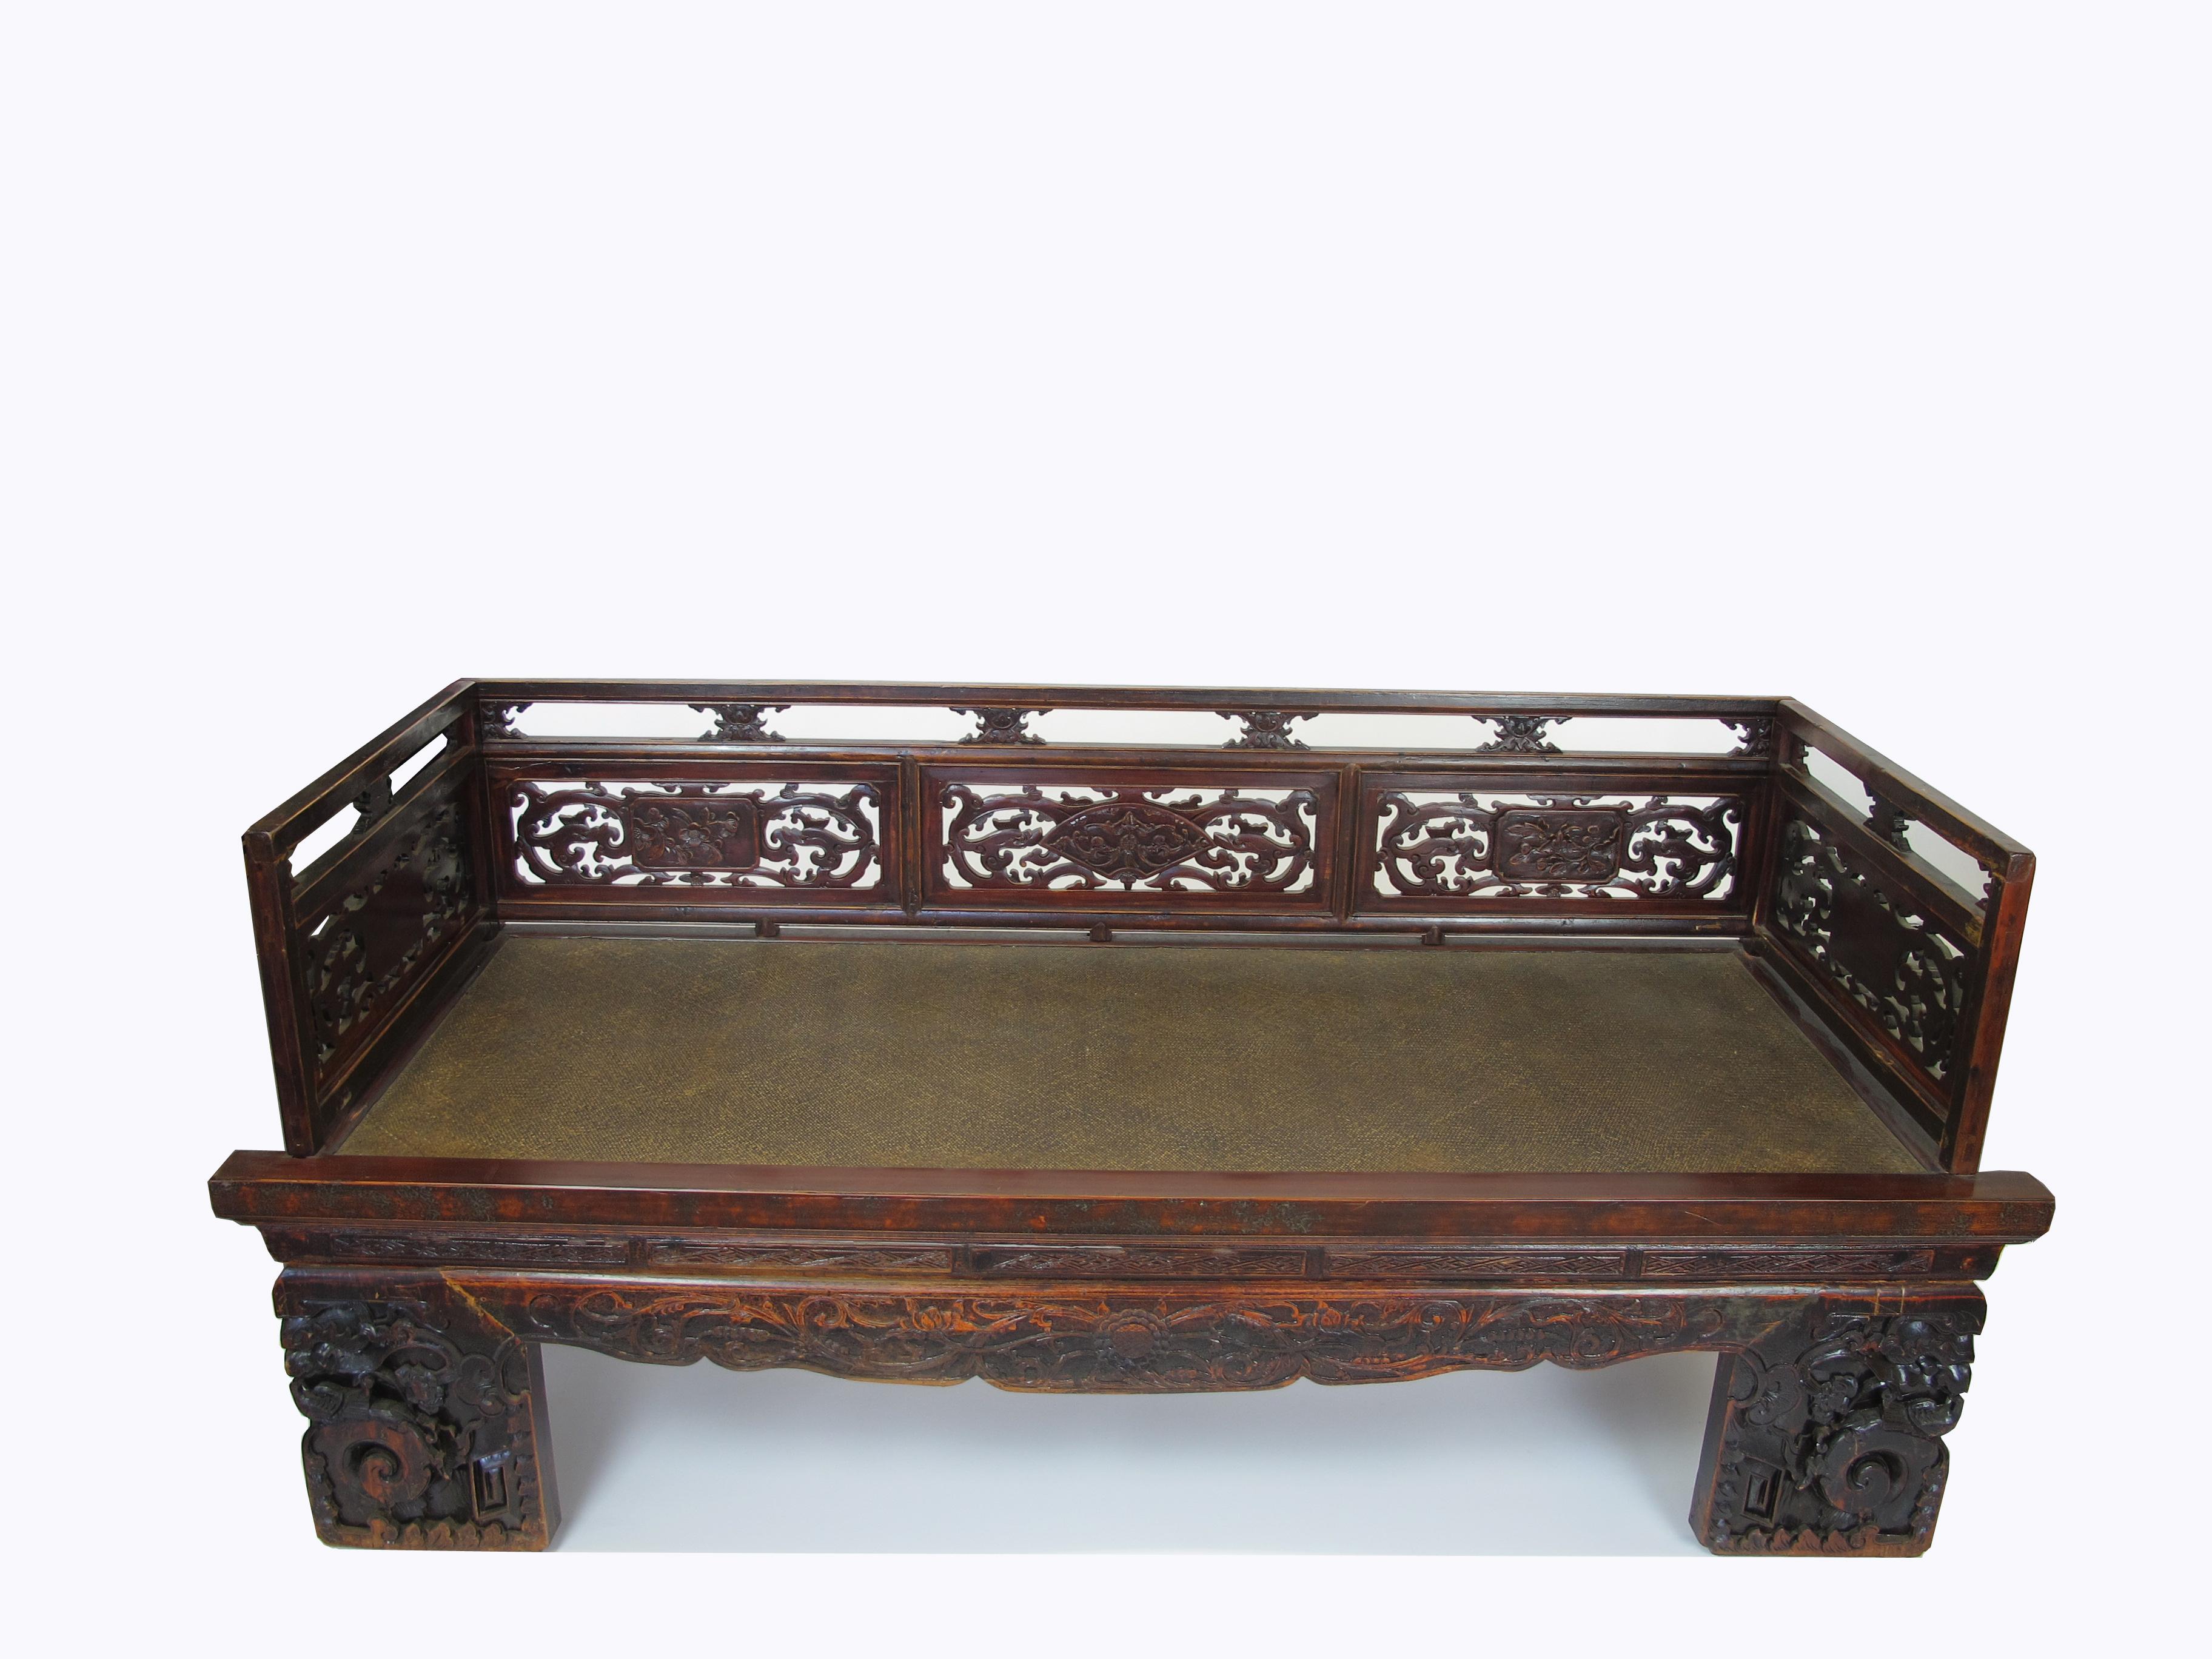 Chinese Export Antique Chinese Daybed with Hand Carved Railing